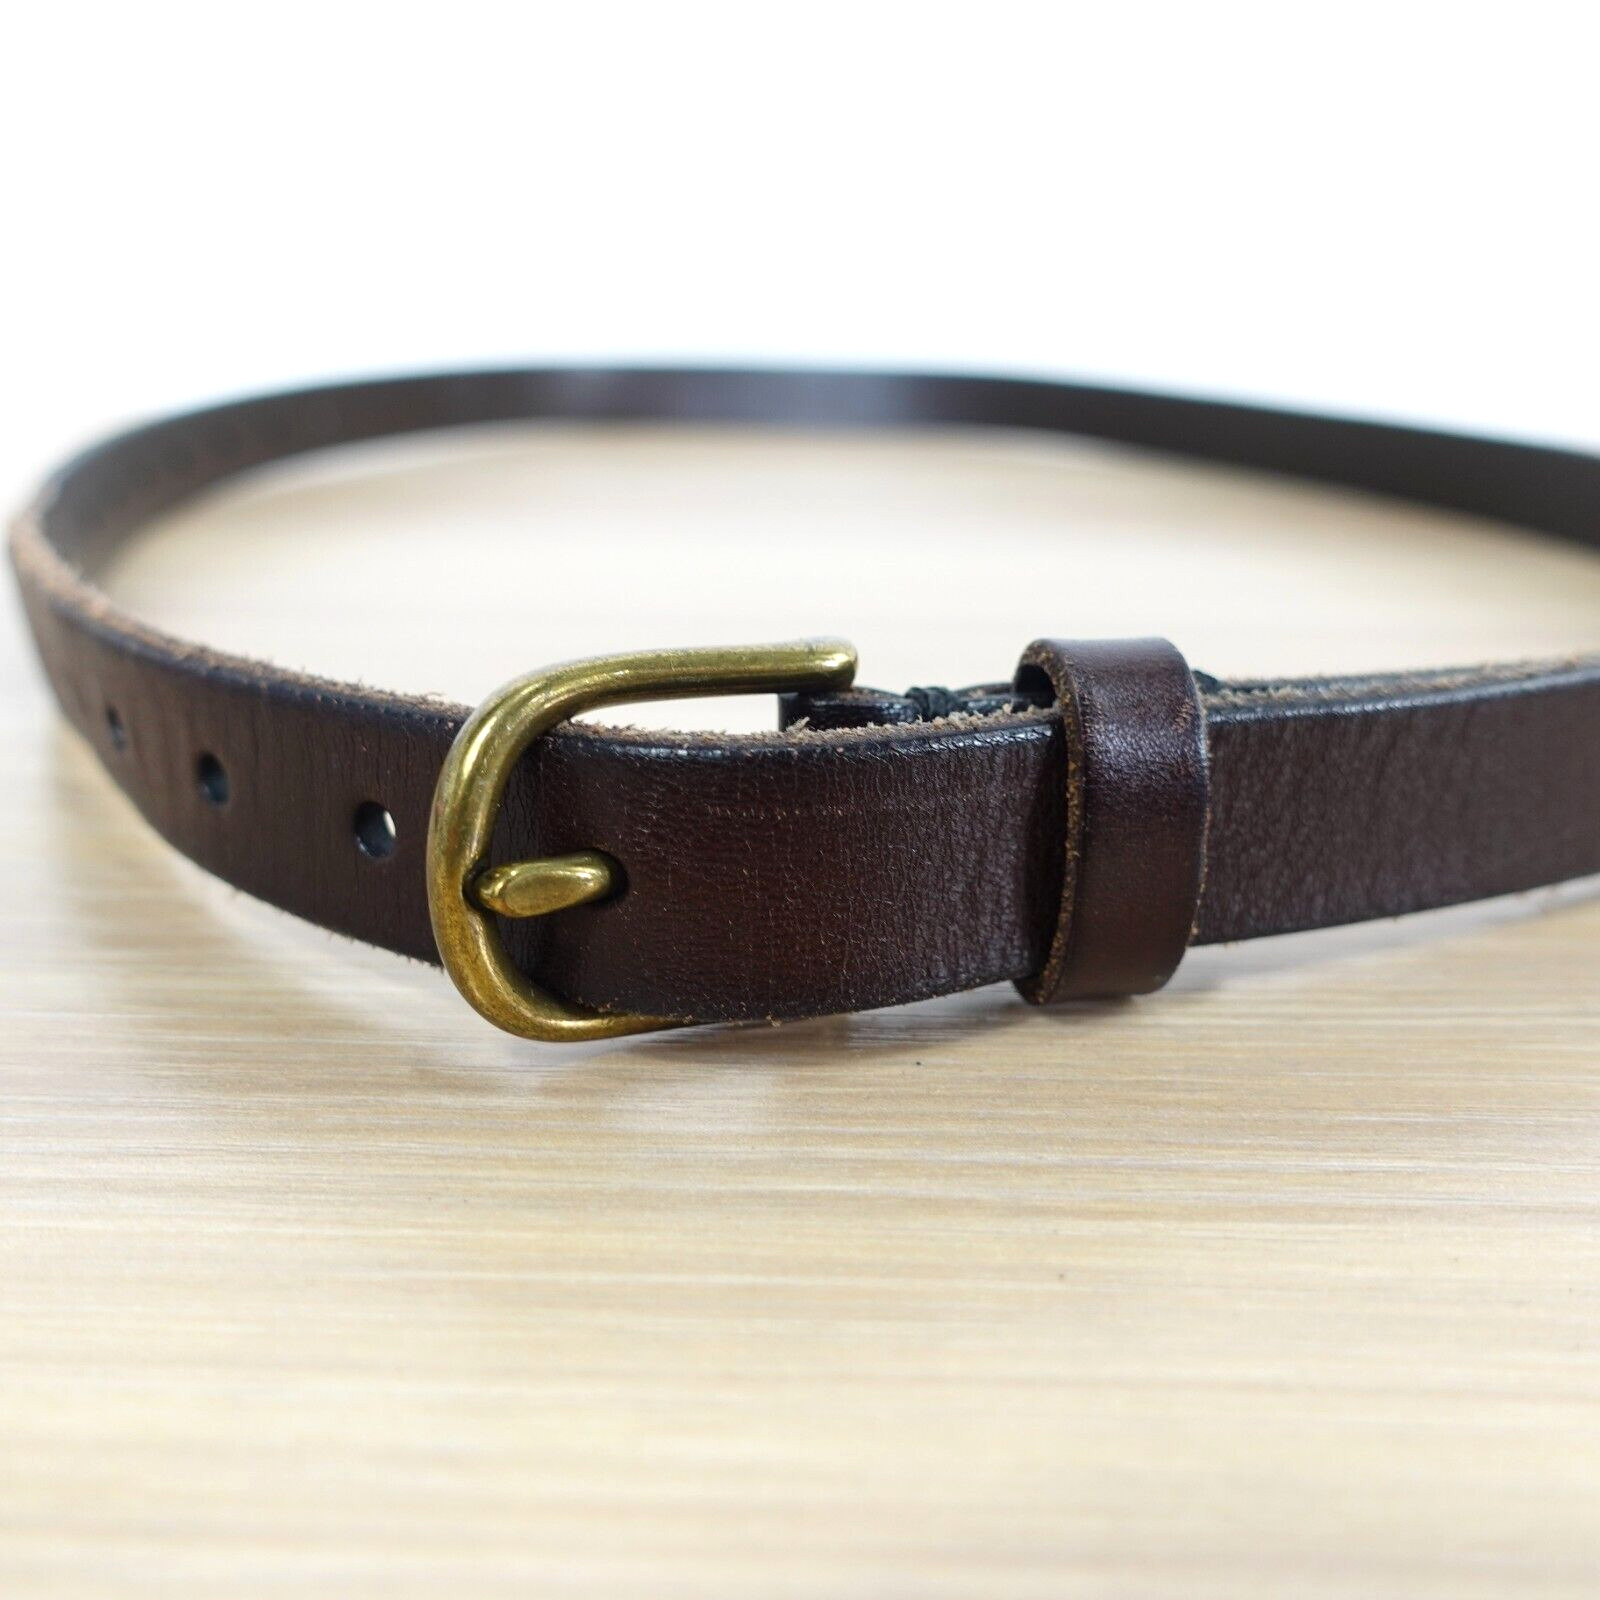 VINTAGE Volpi Concerie Belt Size 32 Brown Leather Italian Genuine Adult ITALY